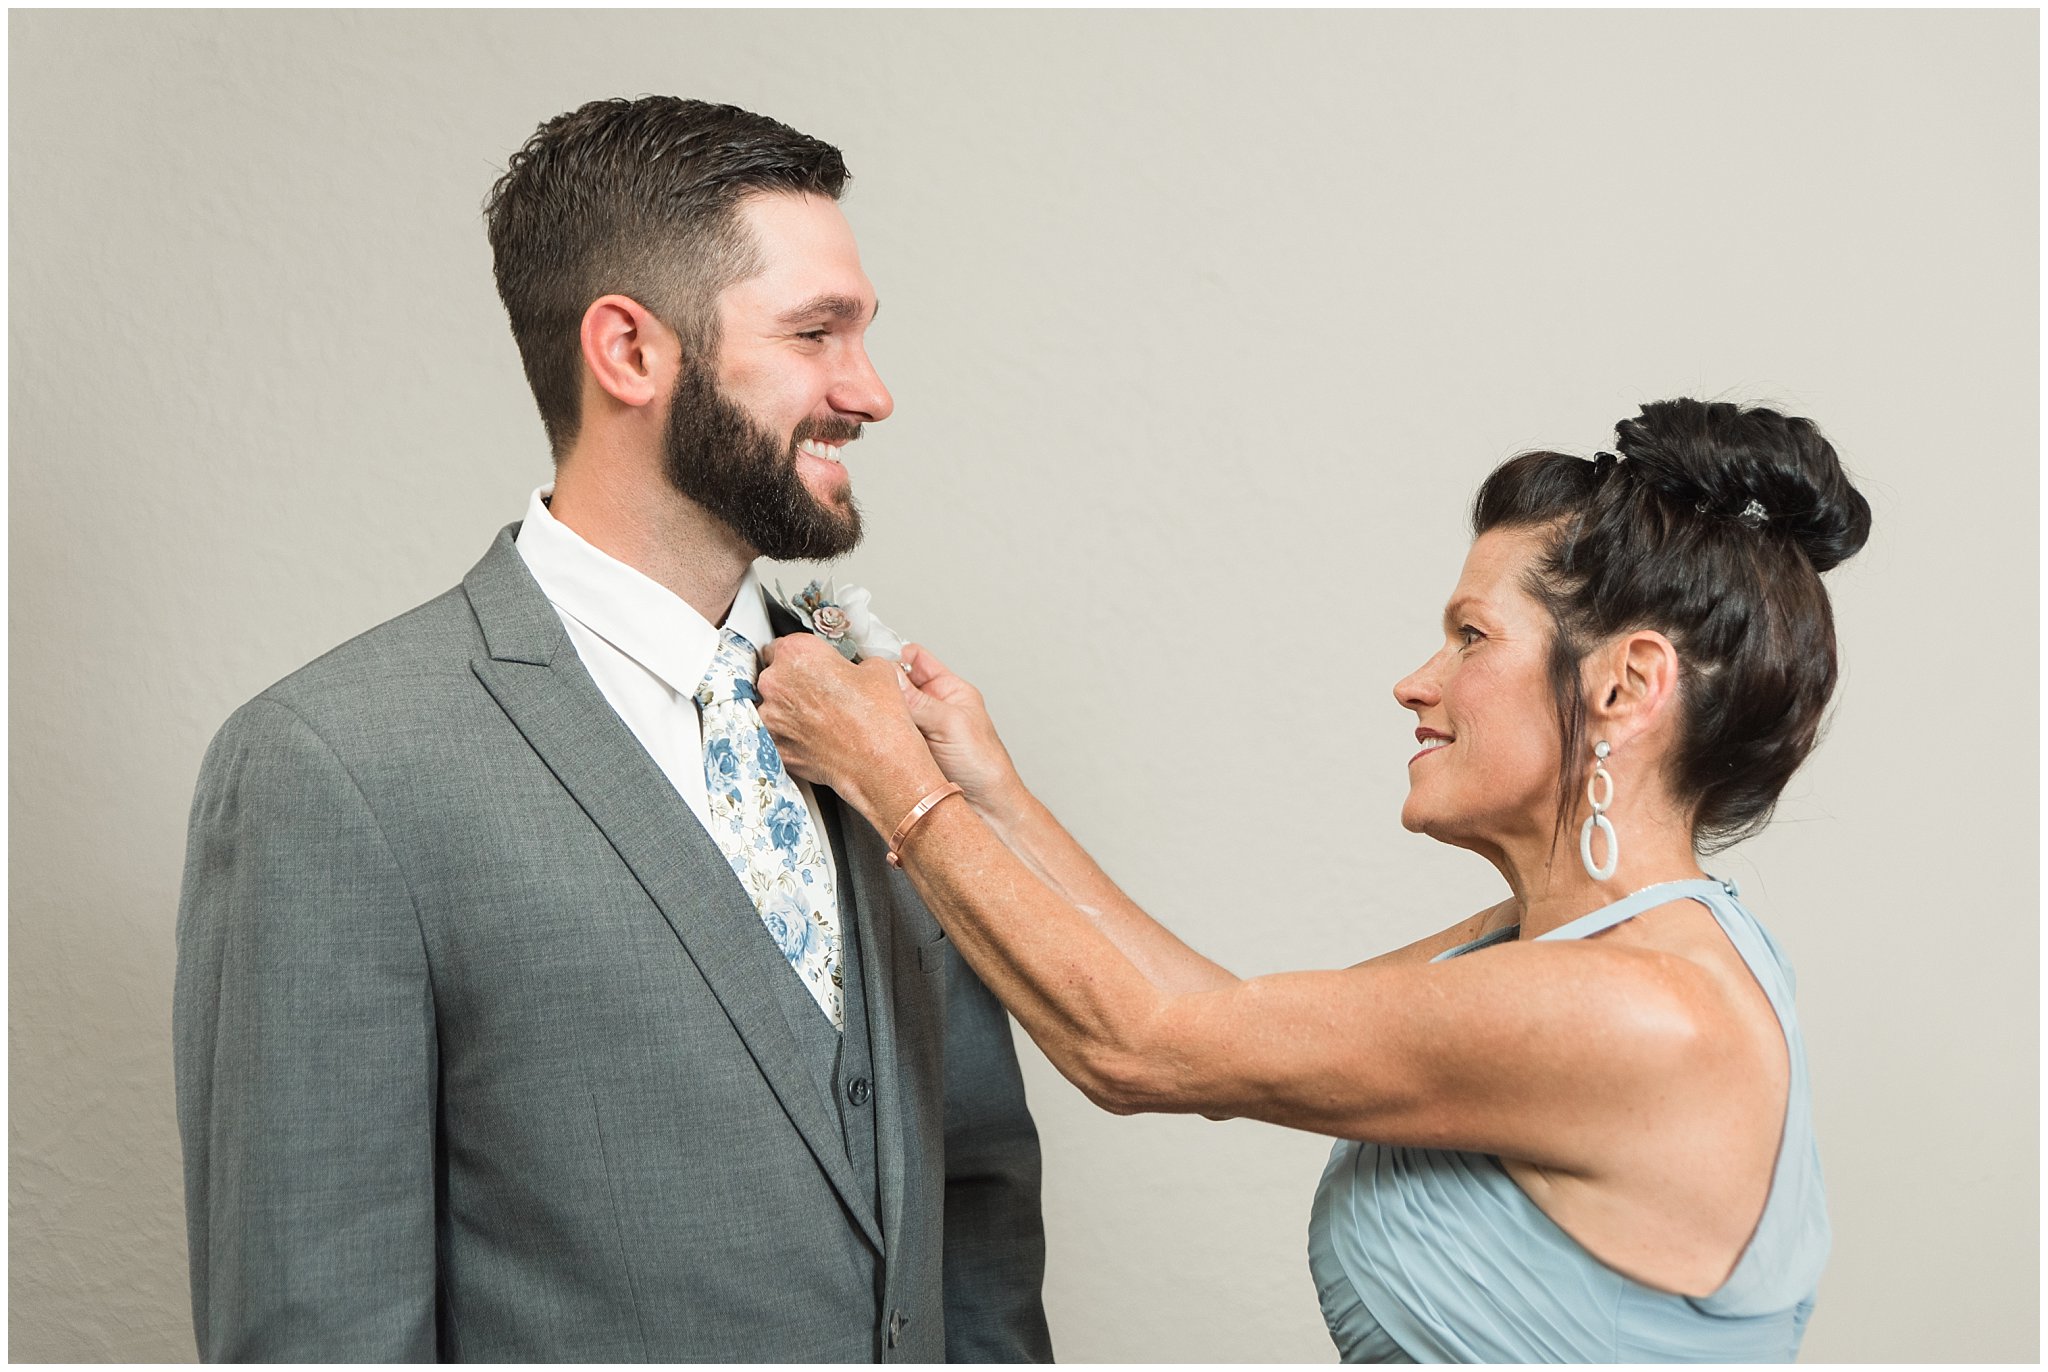 Groom getting ready with a gray suit and blue and white floral tie | Dusty Blue and Rose Summer Wedding at Oak Hills Utah | Jessie and Dallin Photography